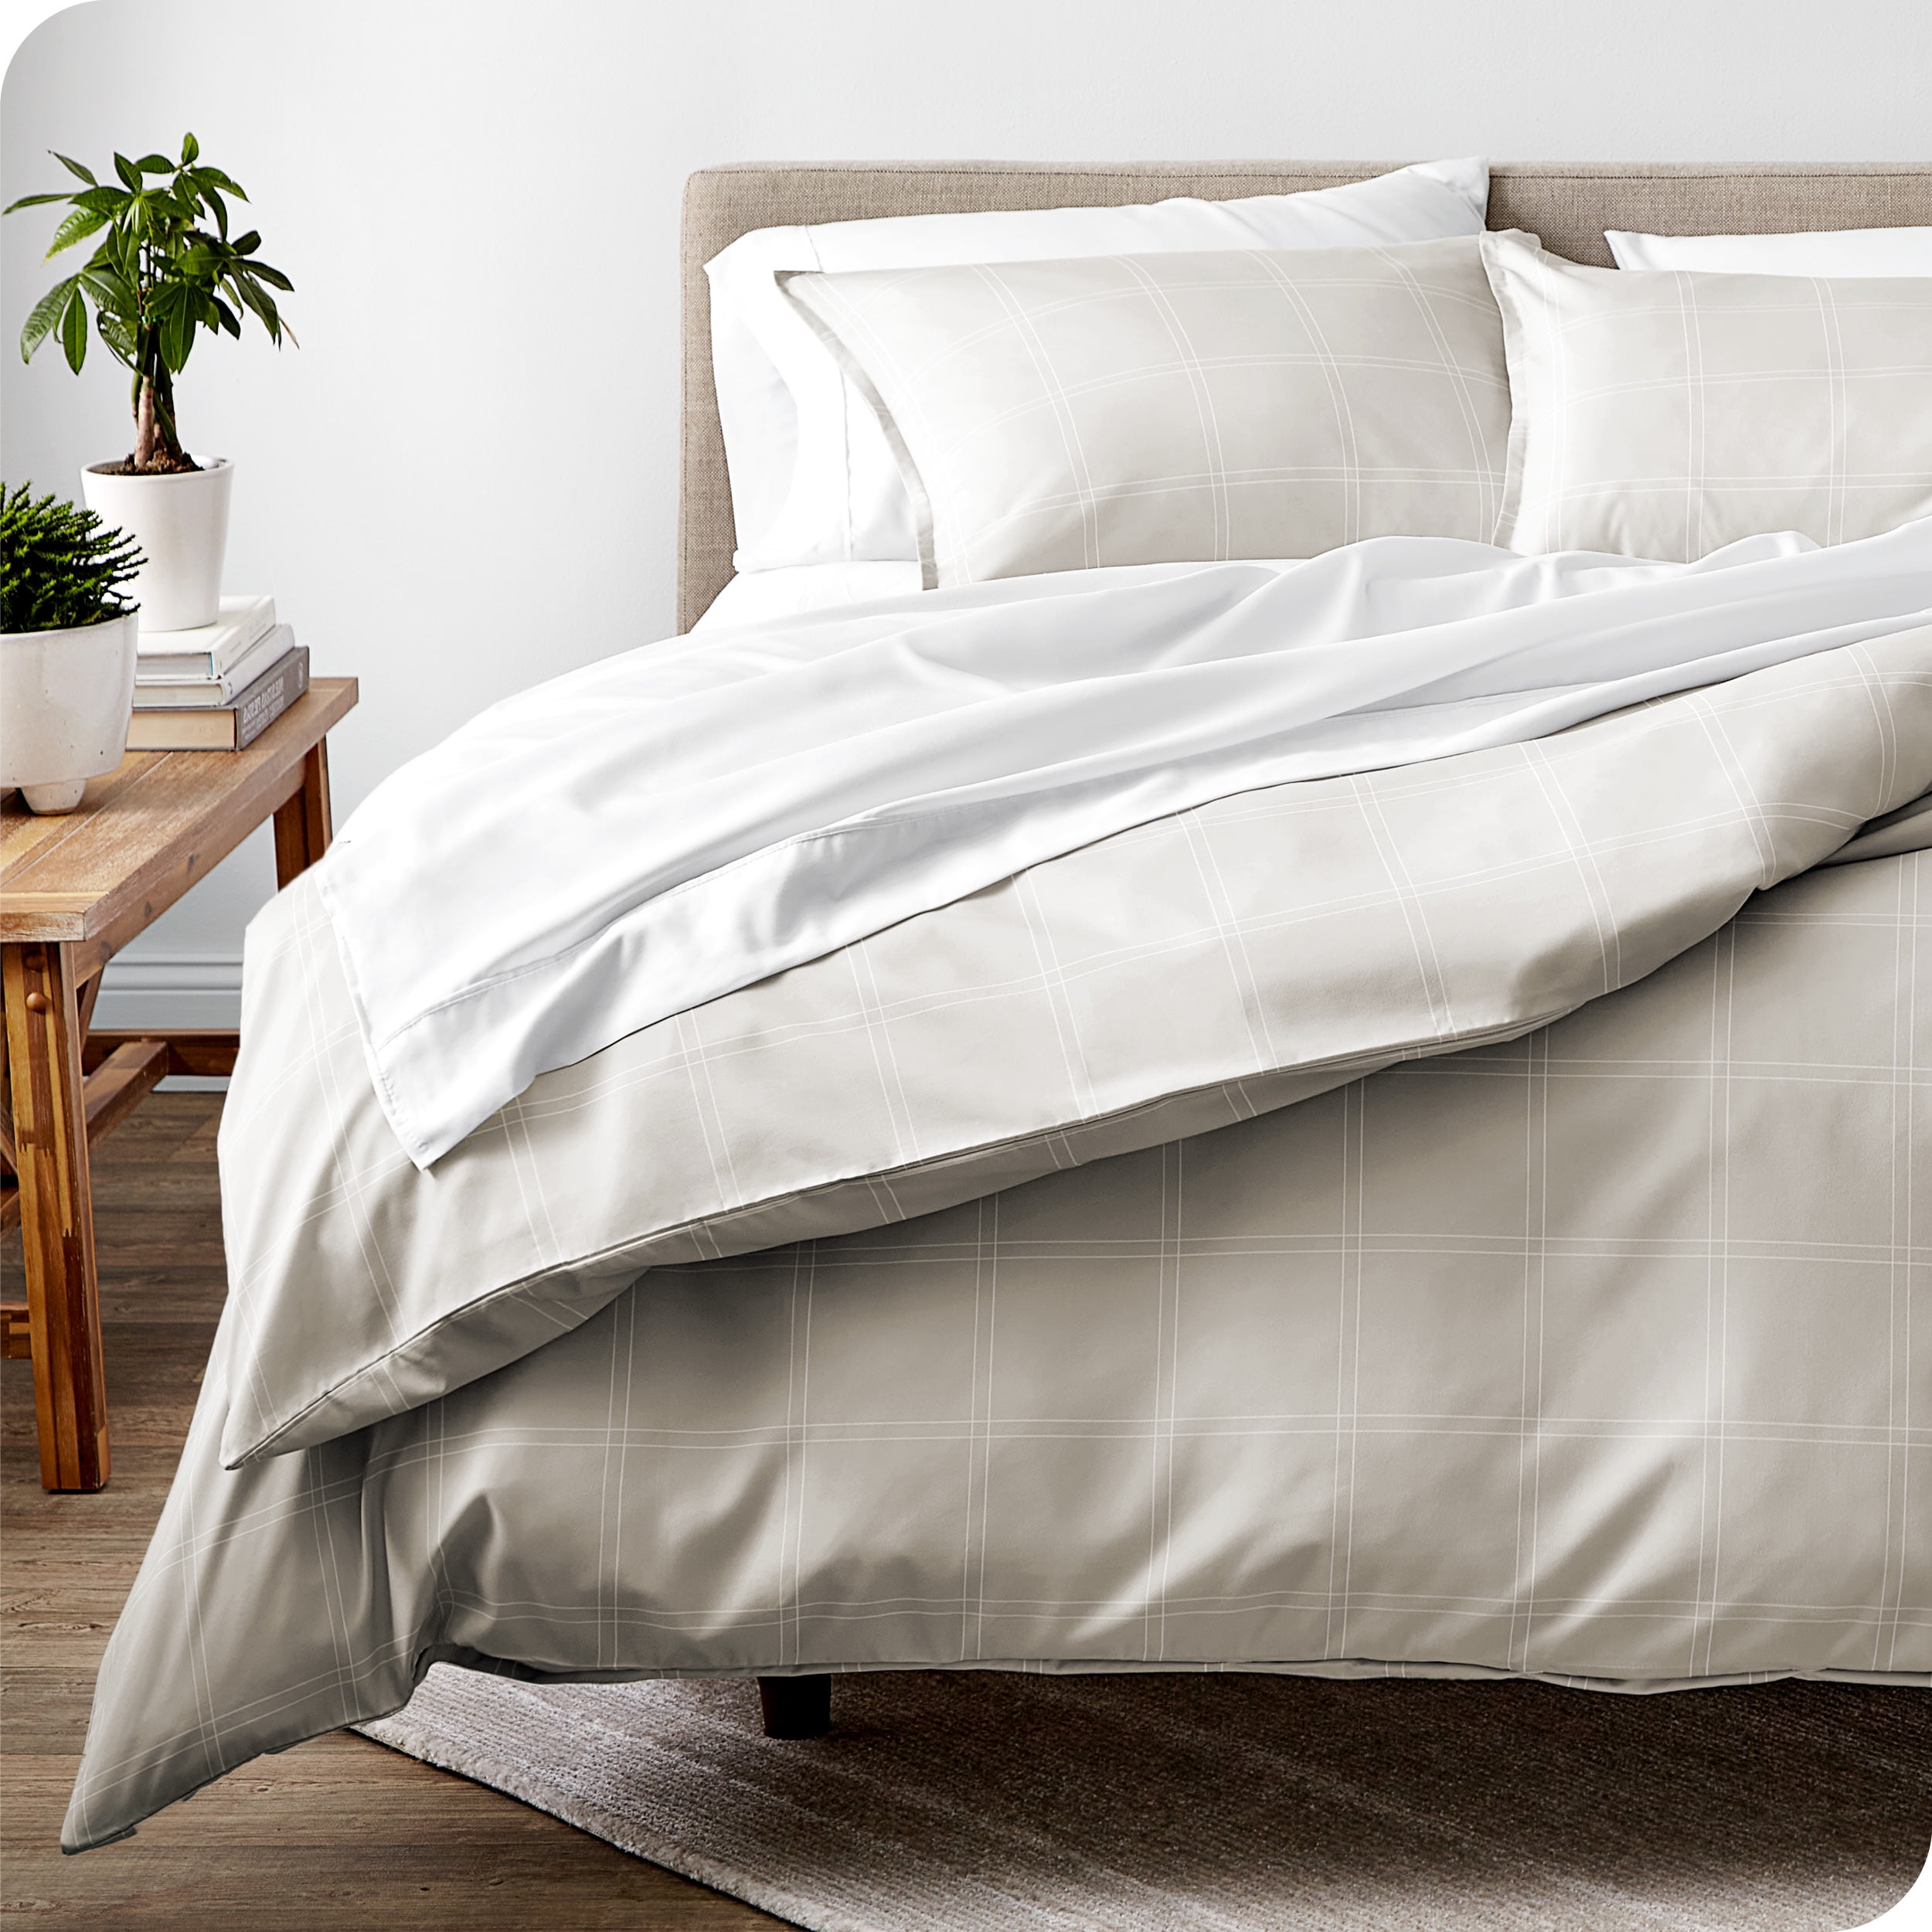 Soft & Airy Linen Duvet Cover Size King/Cali King in White by Brooklinen